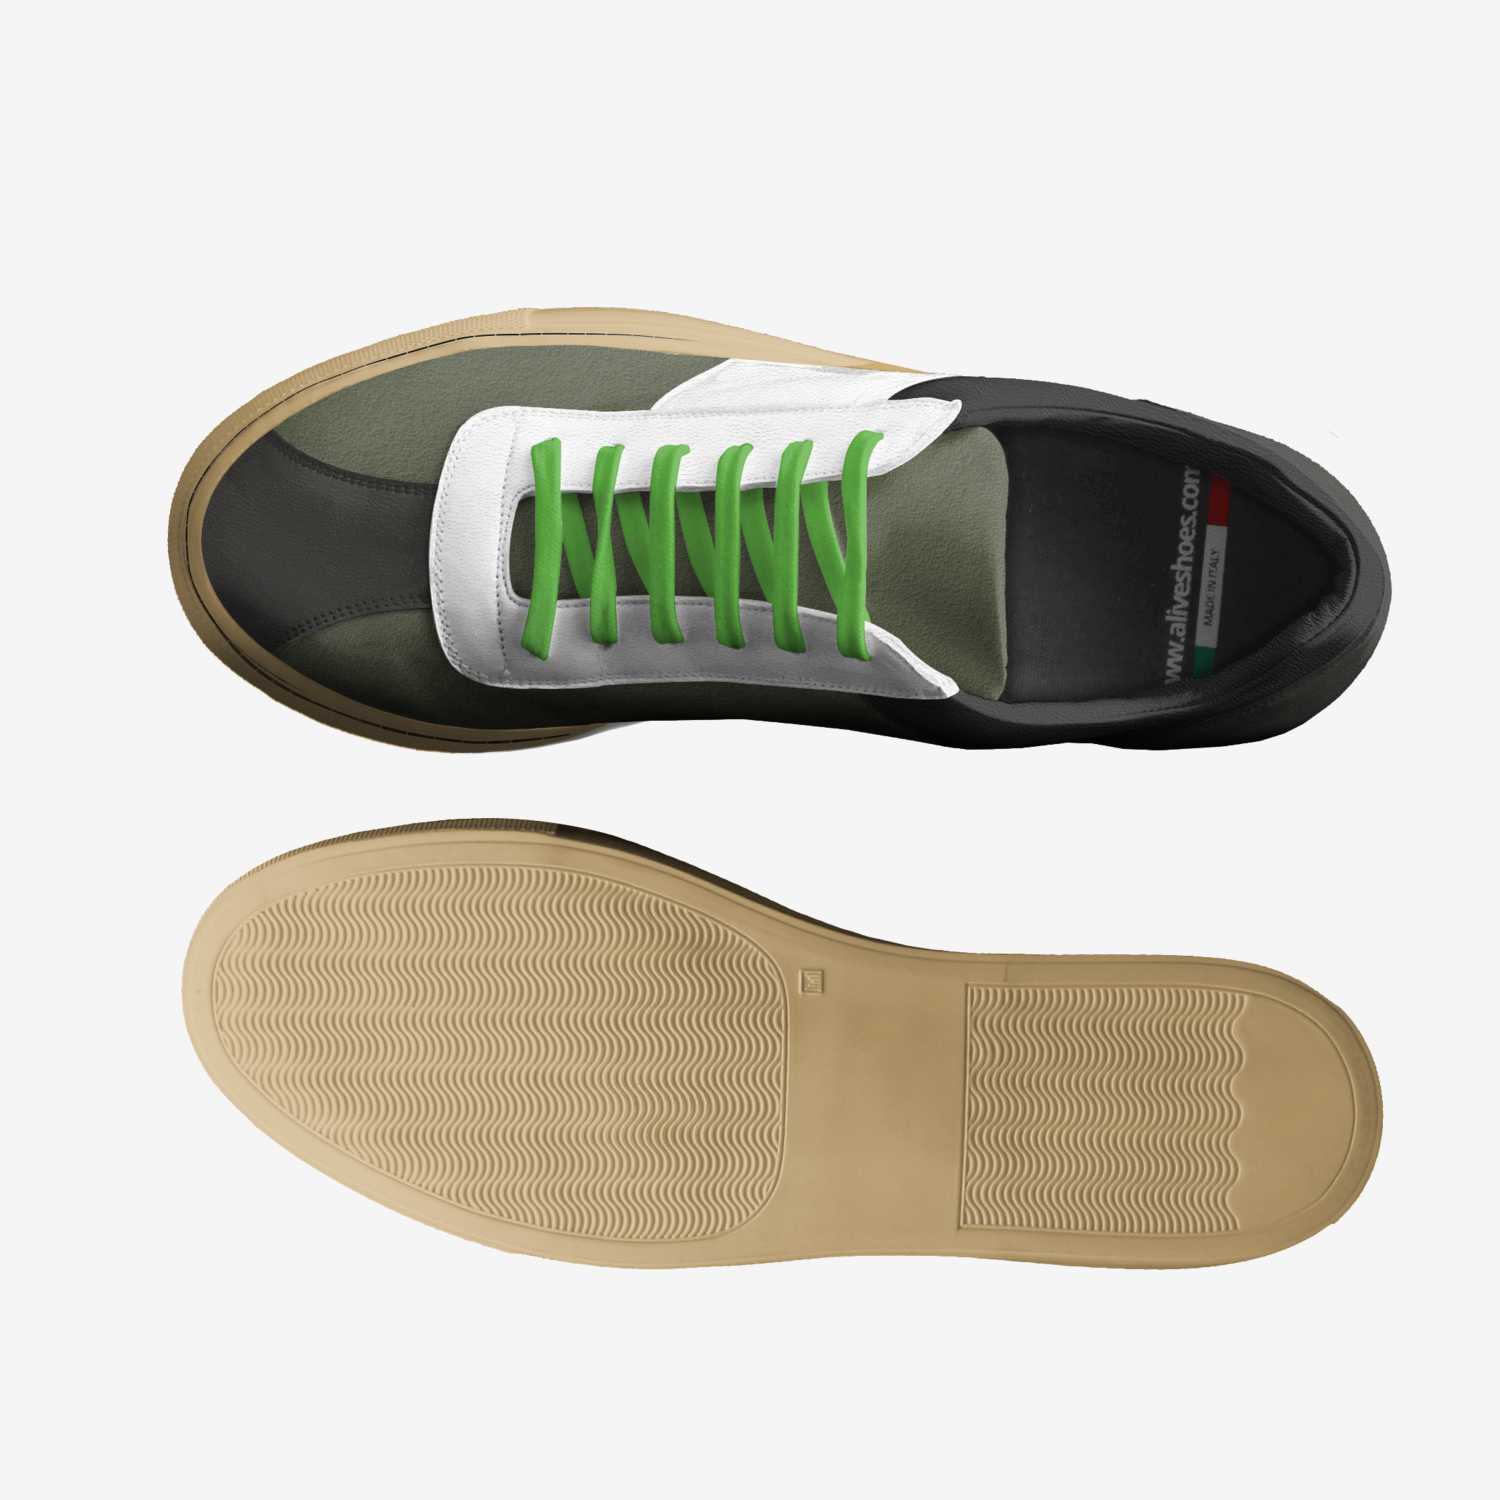 Harone | A Custom Shoe concept by Harry Oneill